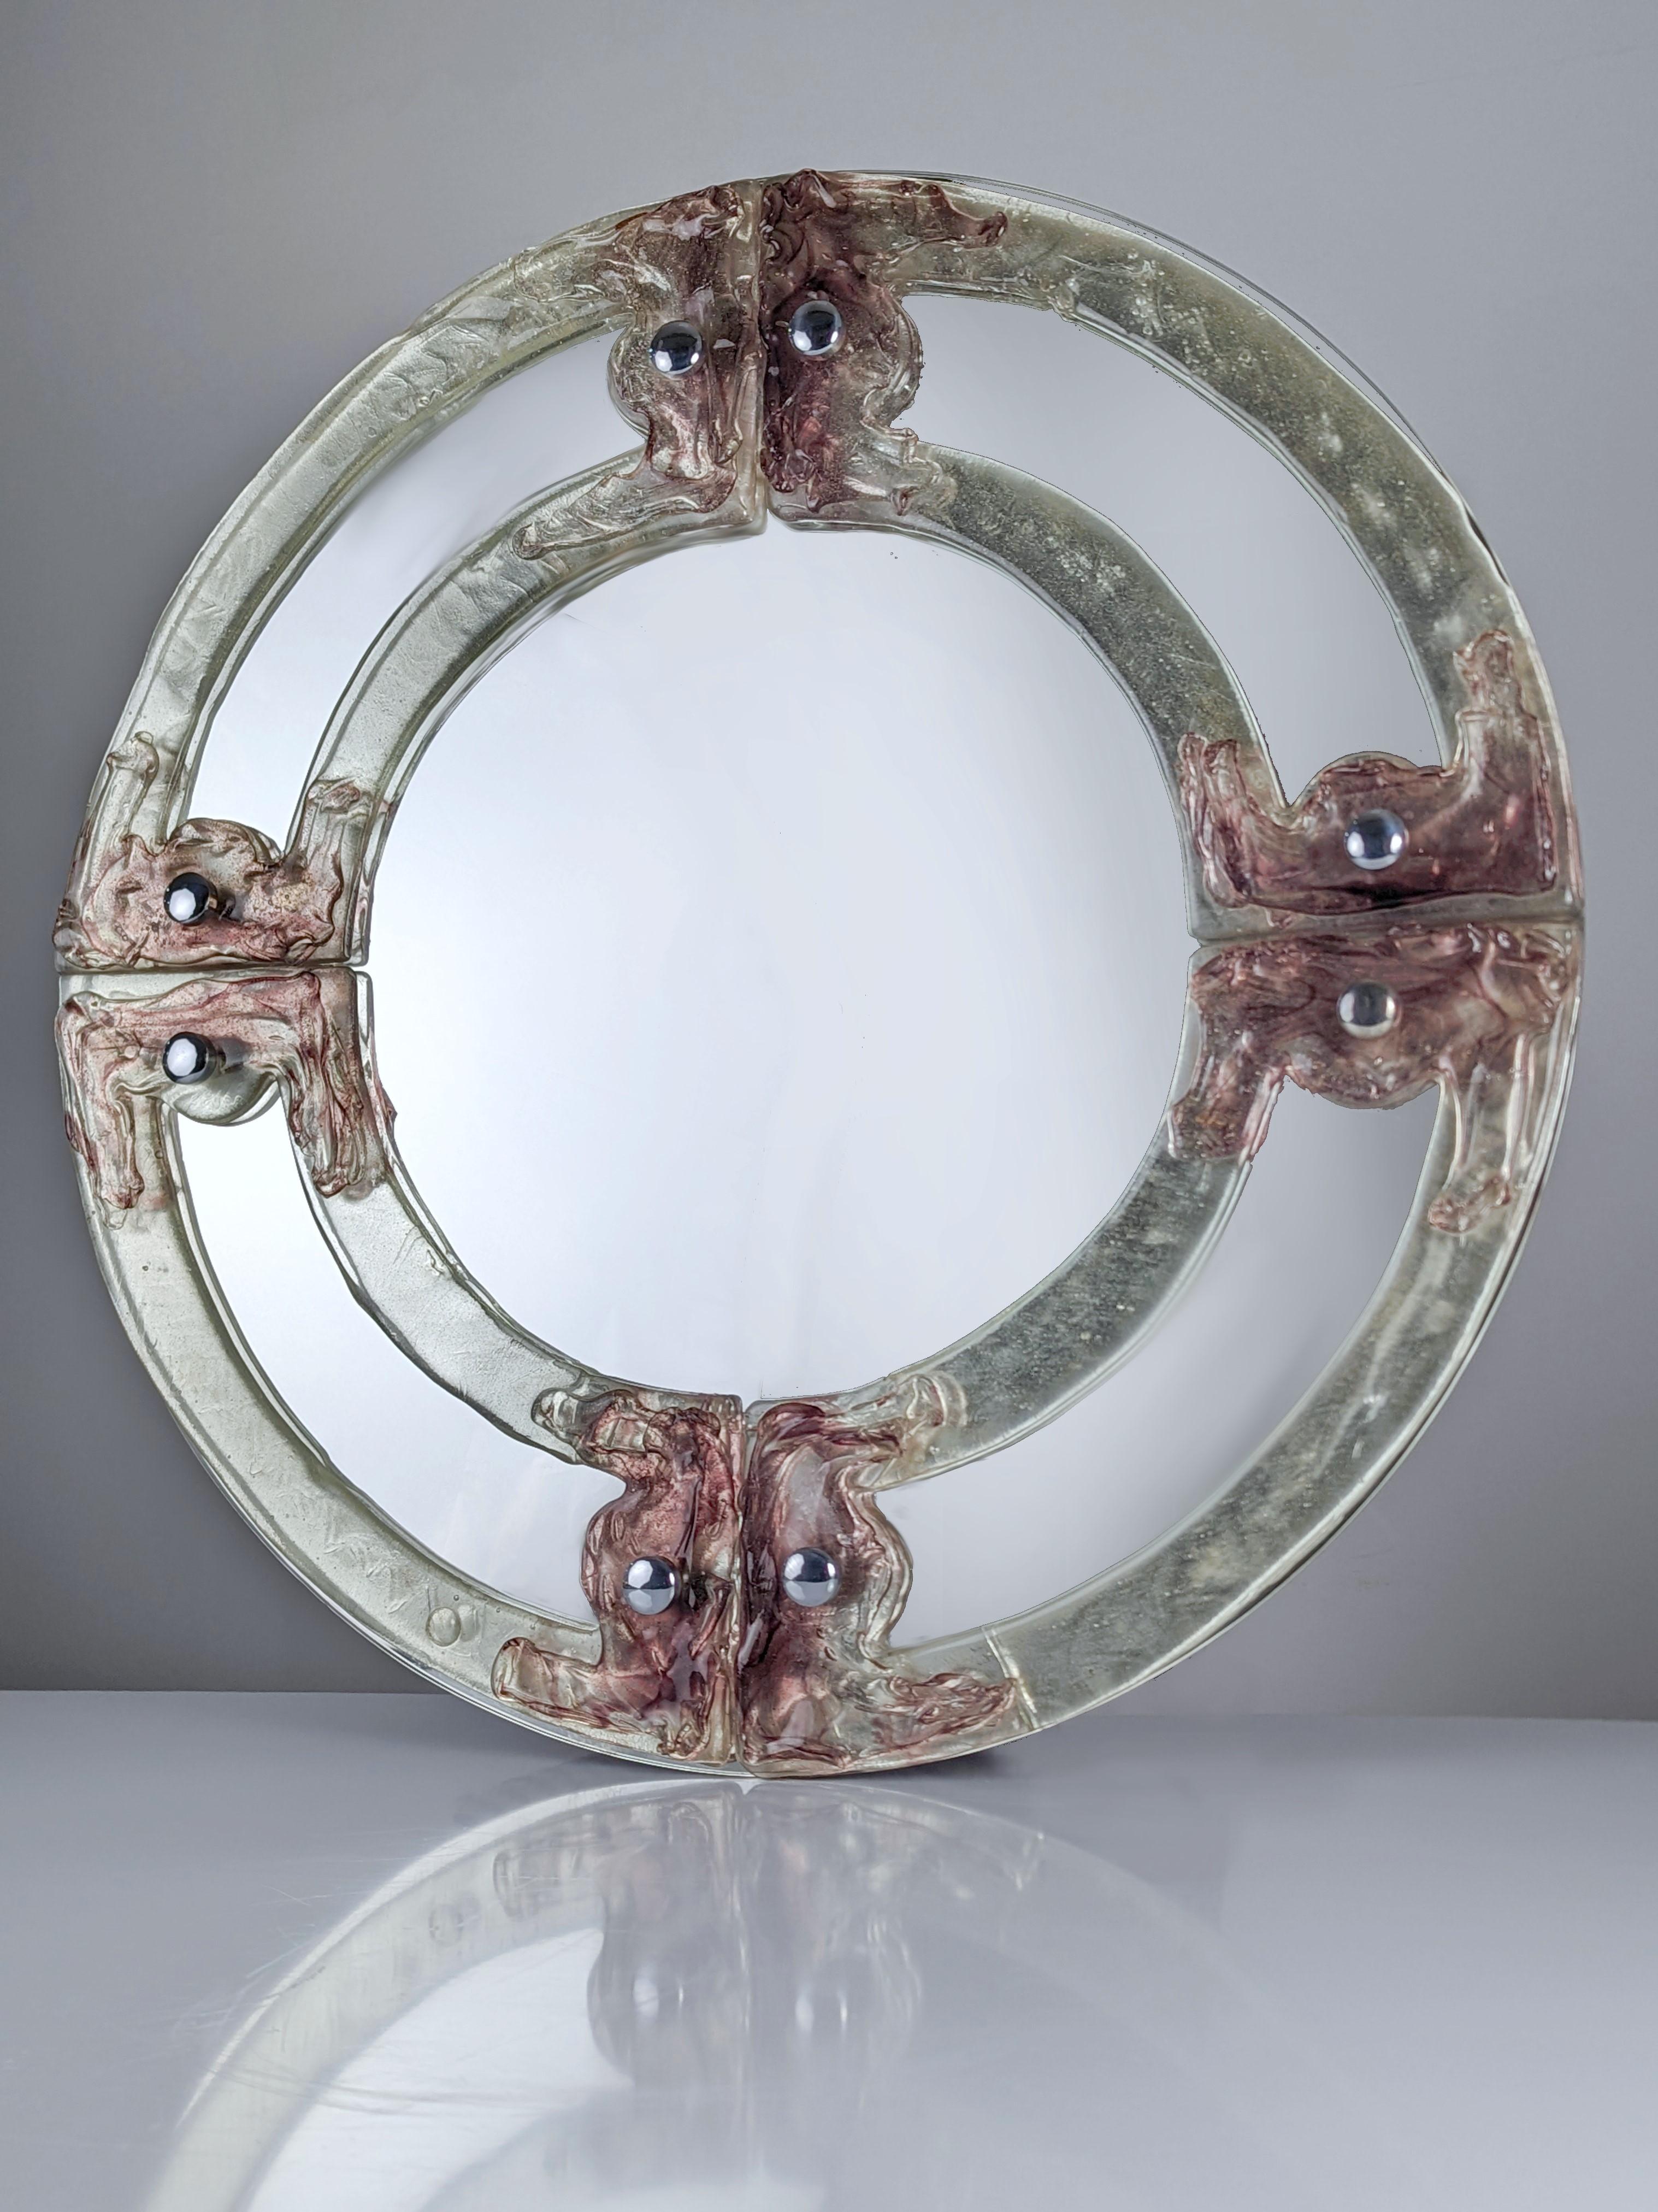 Spectacular round Murano glass mirror in shades of pink and purple, an authentic treasure from the 1960s. Its exquisite Murano glass reflects the rich artisanal heritage of Venice, with a design that captures the essence of the golden age of Italian